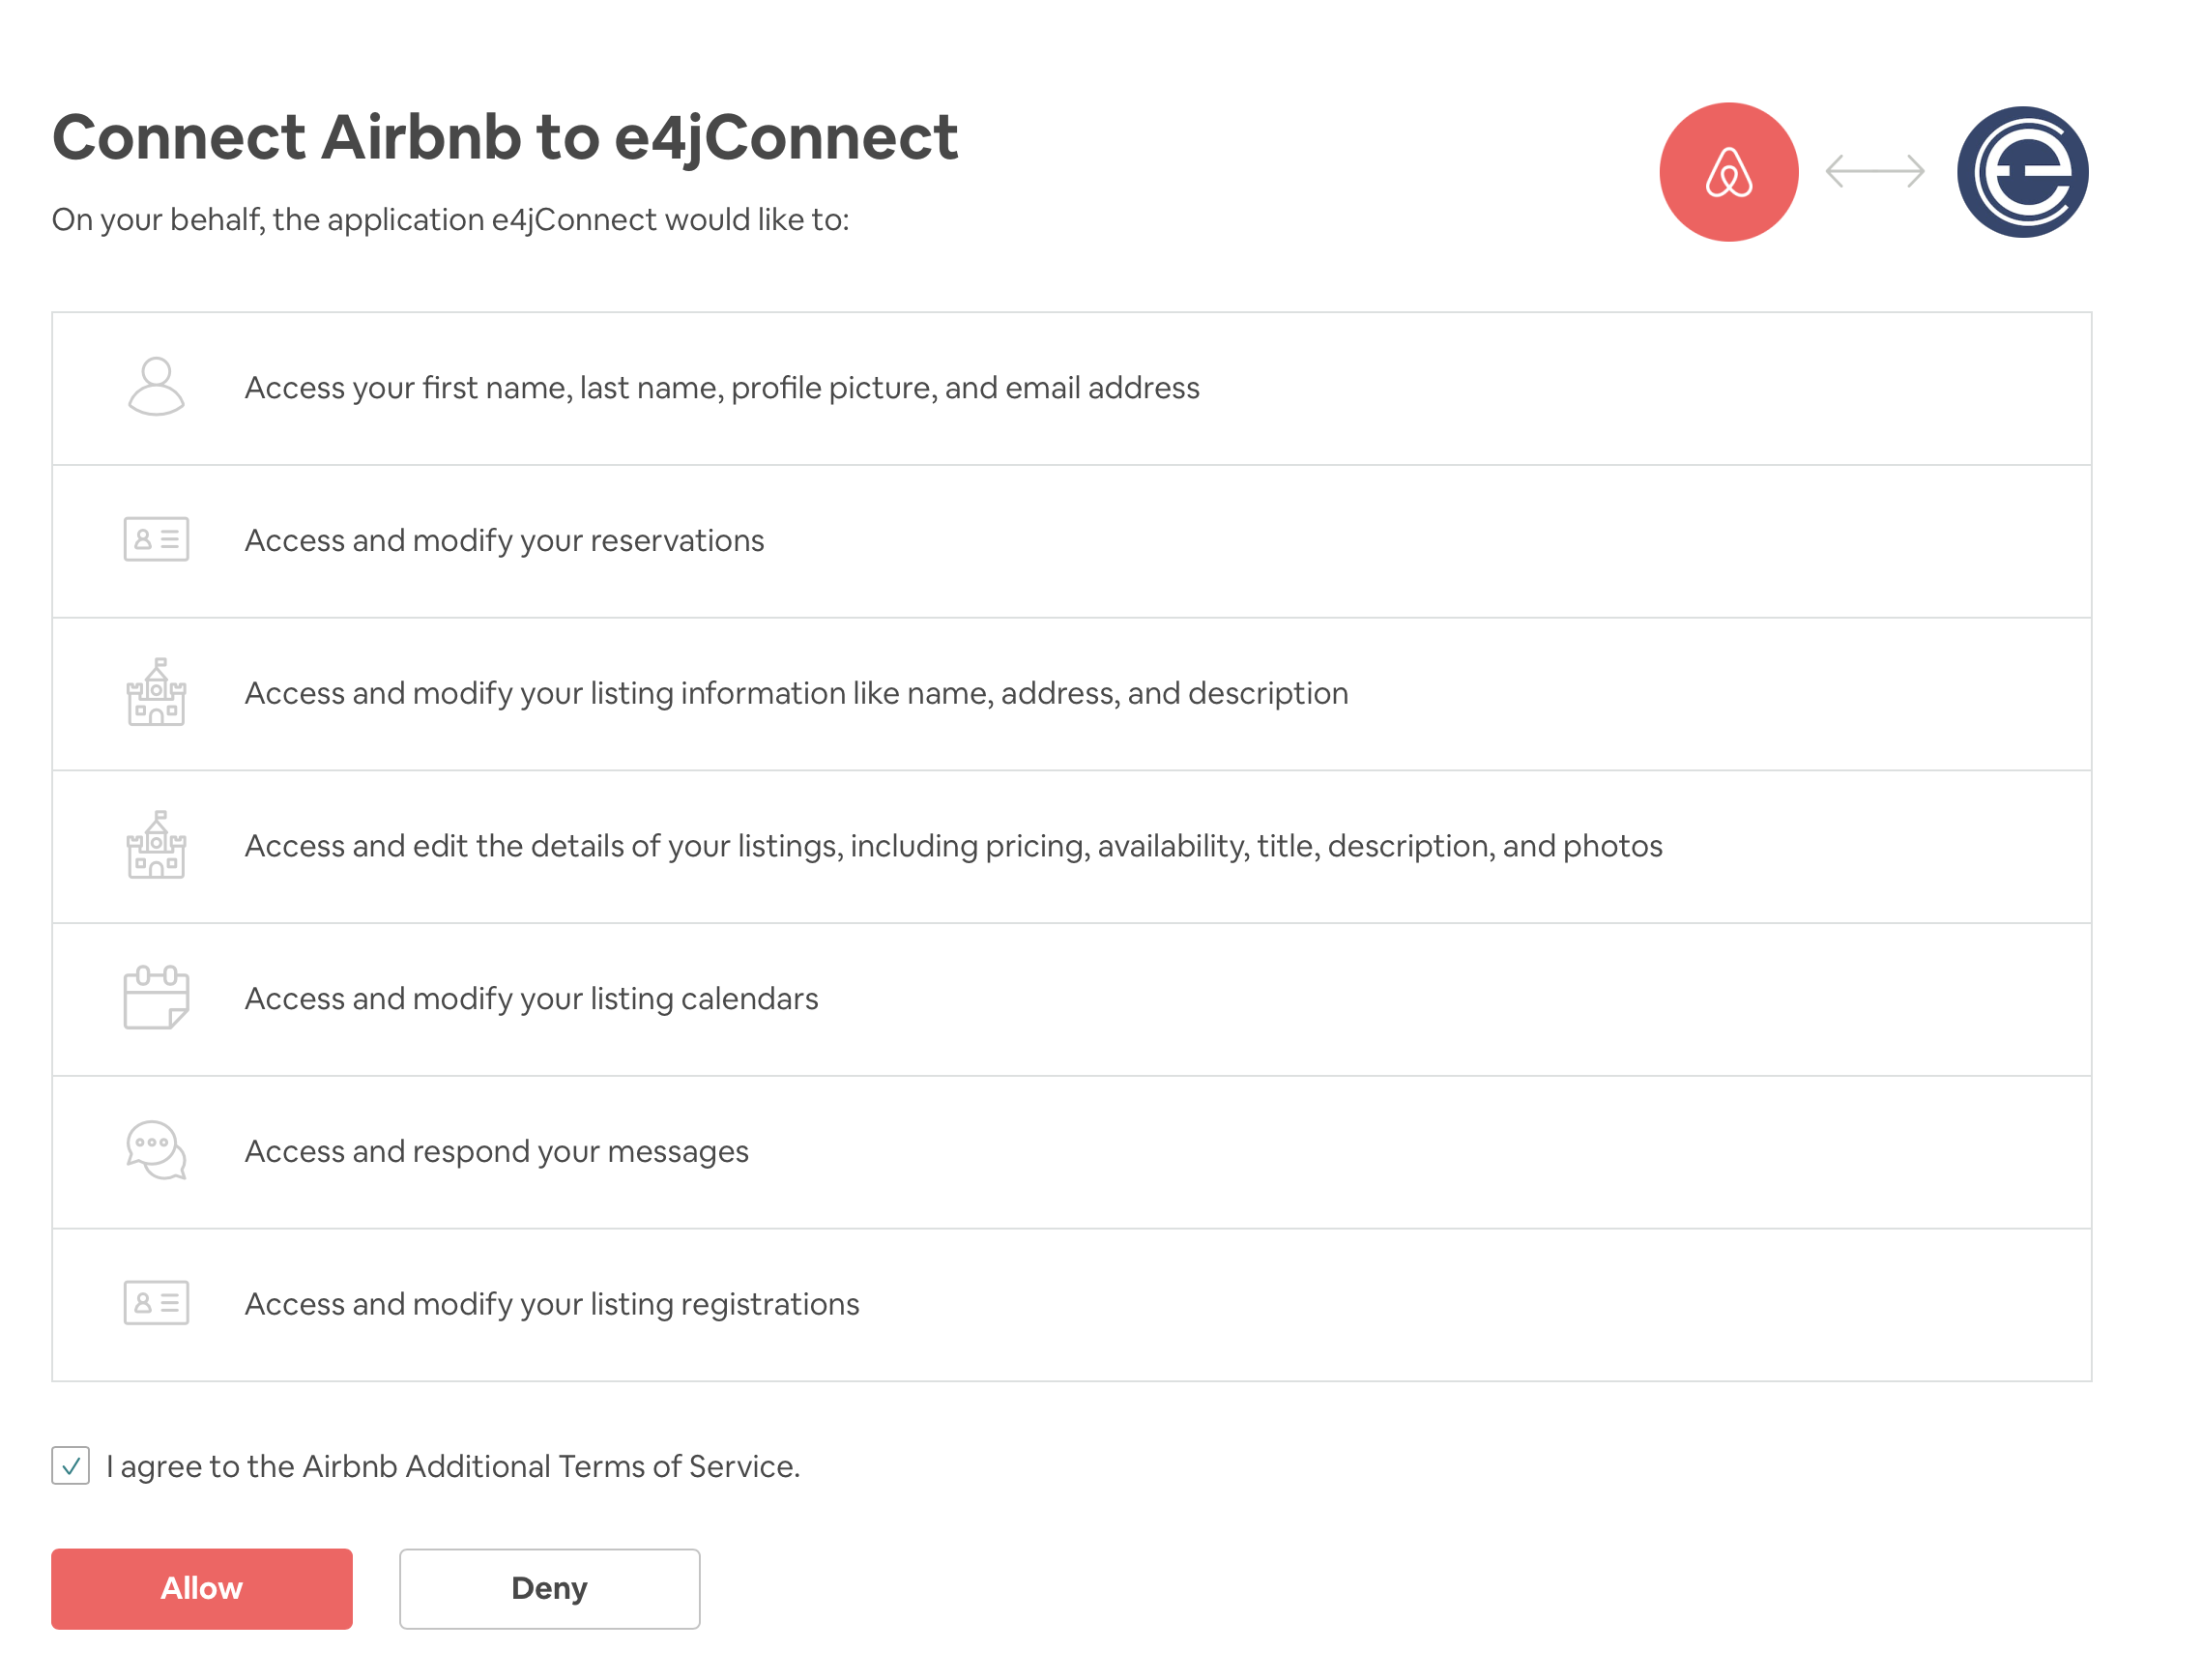 e4jConnect - Activate the connection with Airbnb